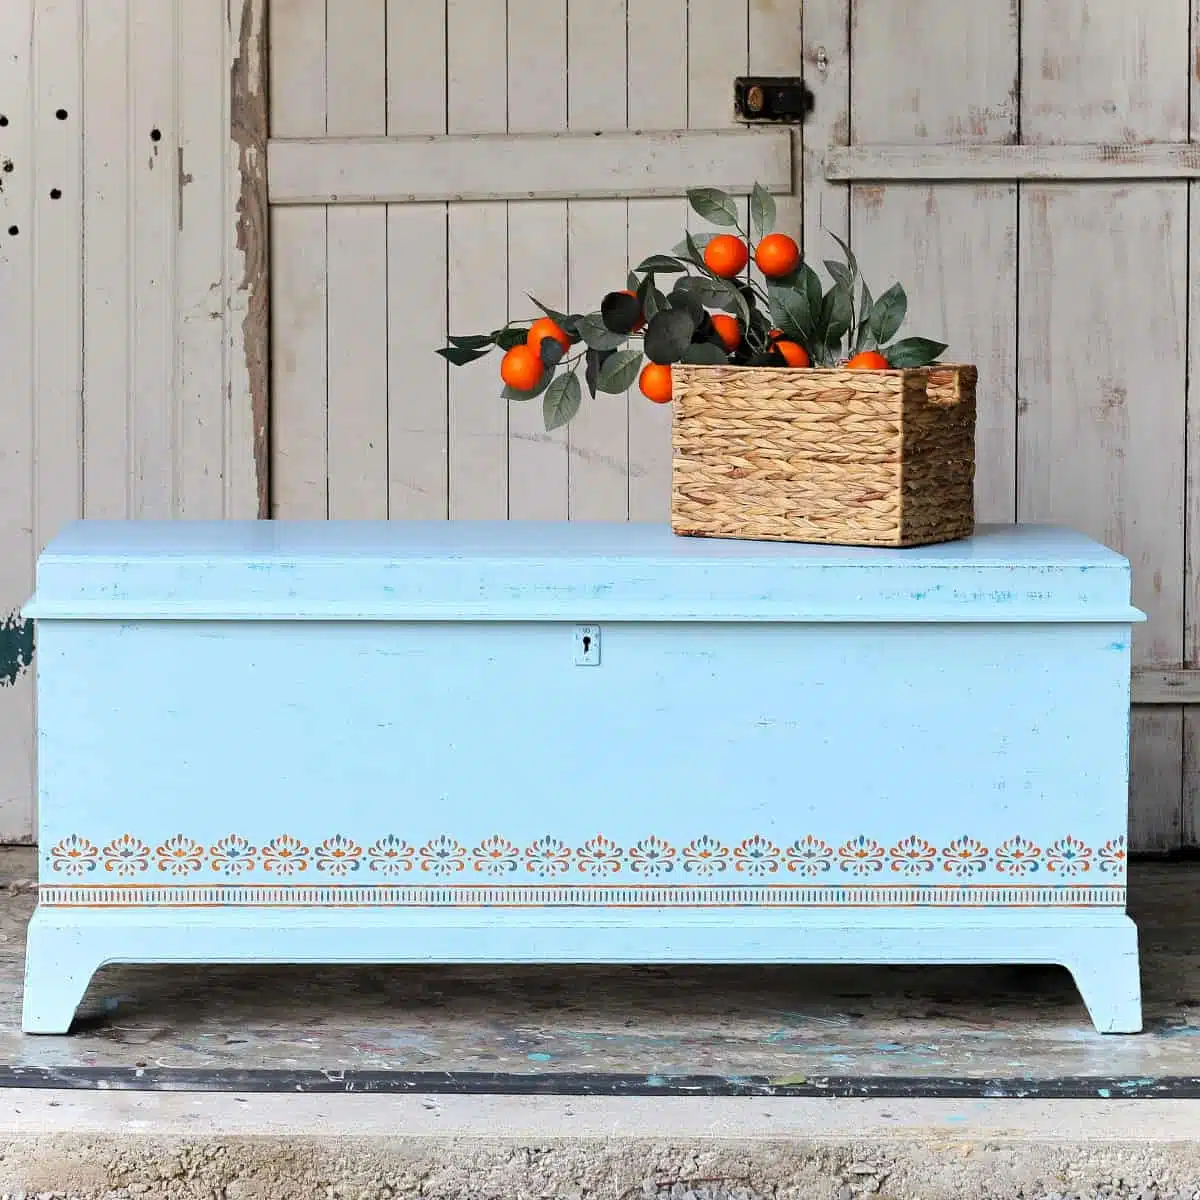 How To Paint A Cedar Chest And Stencil A Handmade Charlotte Design In Orange And Blue